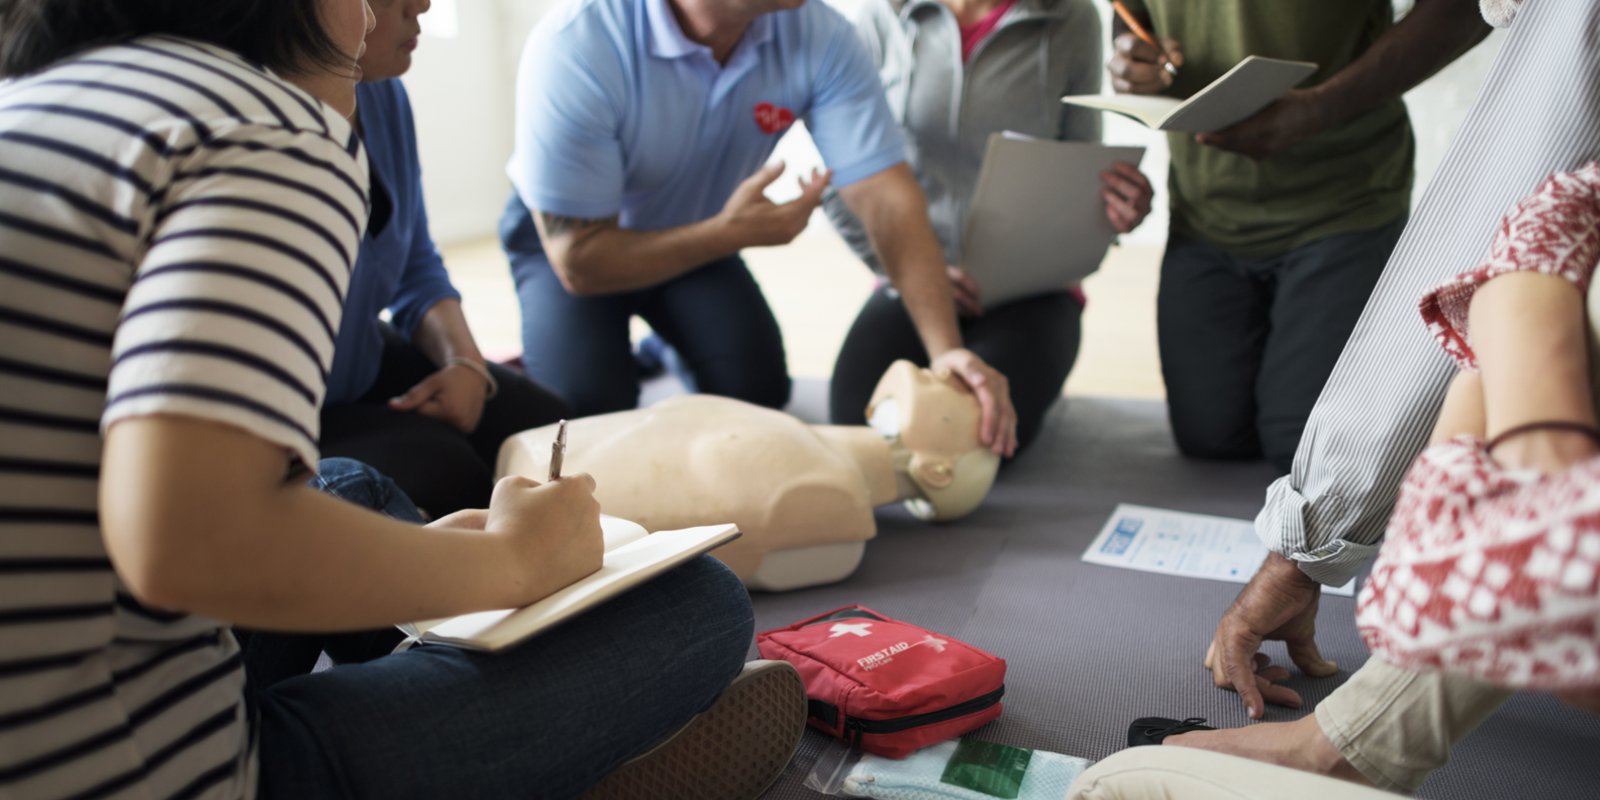 CPR AED First Aid with a certified Heartsaver instructor.